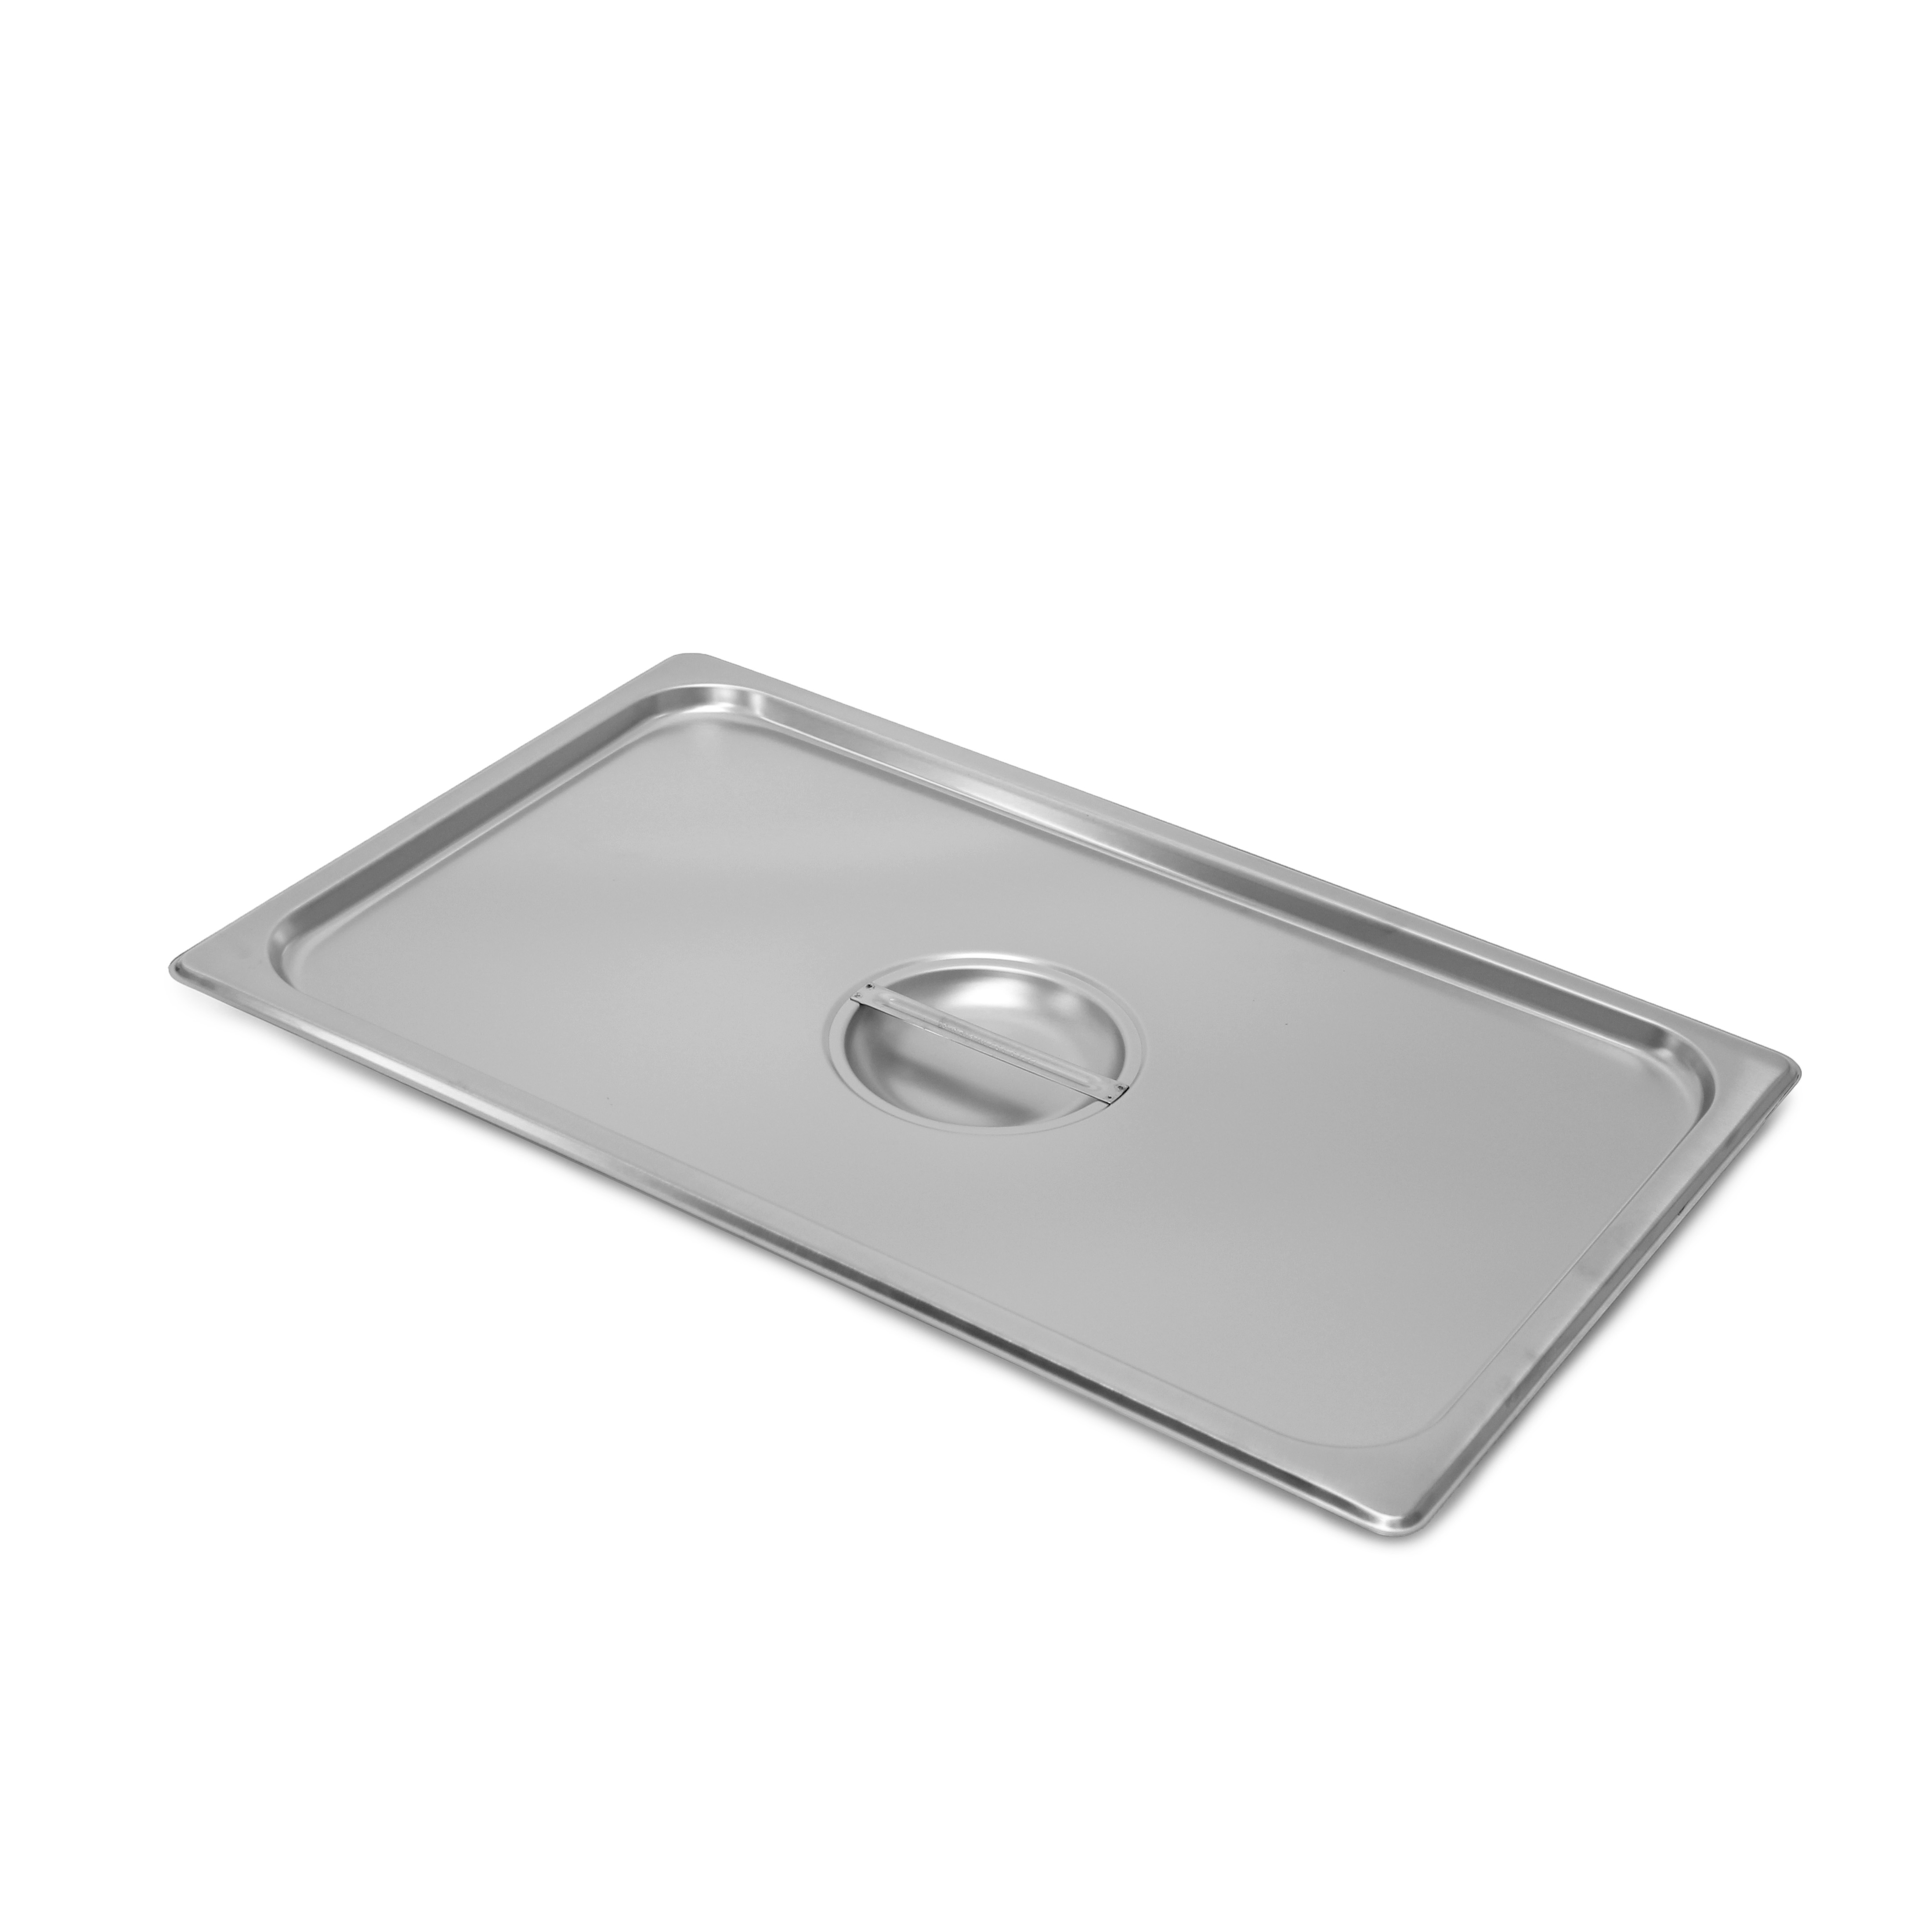 SignatureWares® Stainless Steel Steam Table Pan Solid Cover w/ Handle, Full Size - STEAMPAN000C